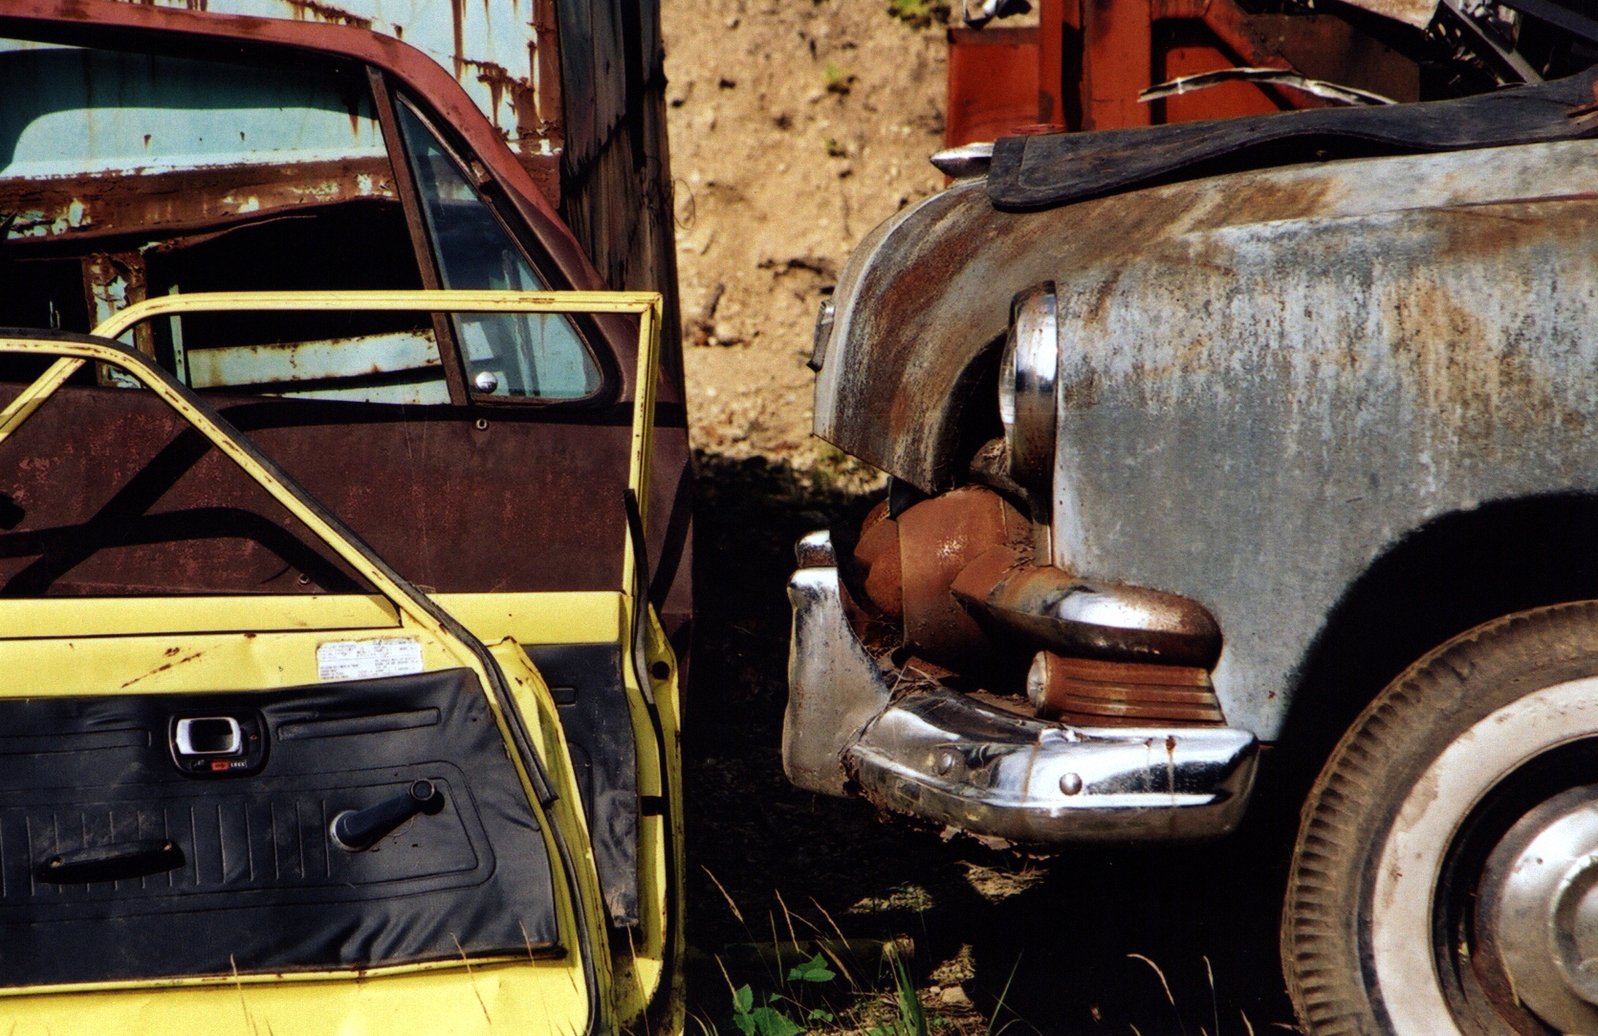 rusted out cars that are sitting in the dirt